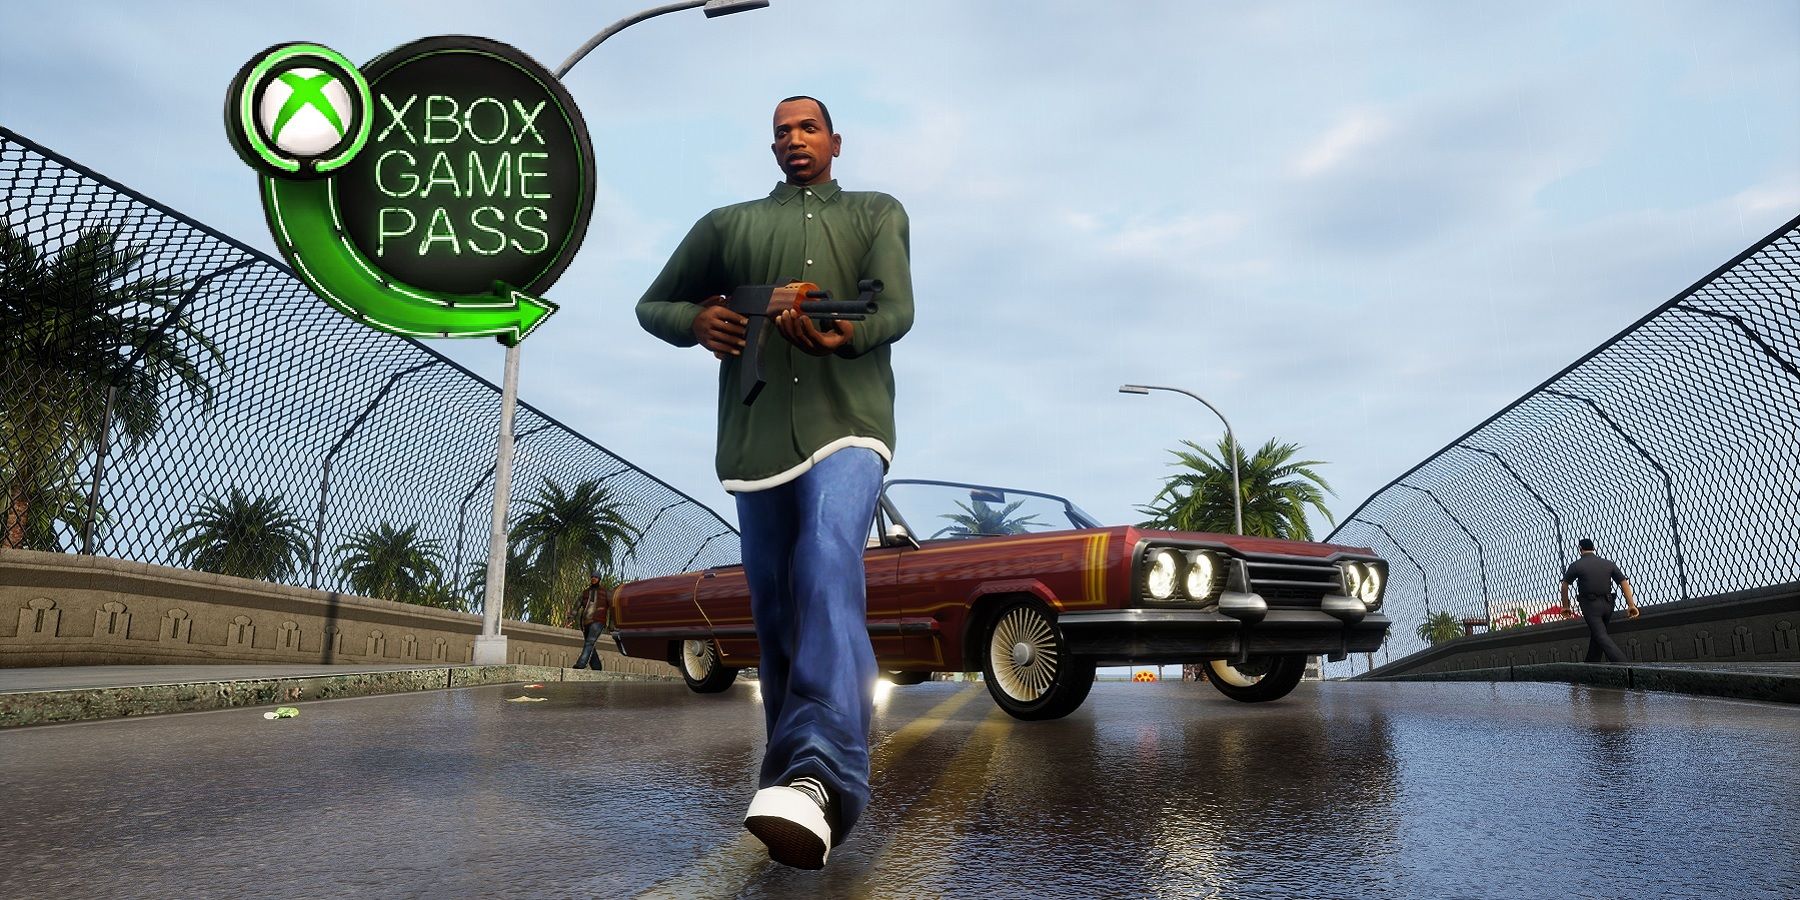 grand theft auto san andreas cj with xbox game pass logo